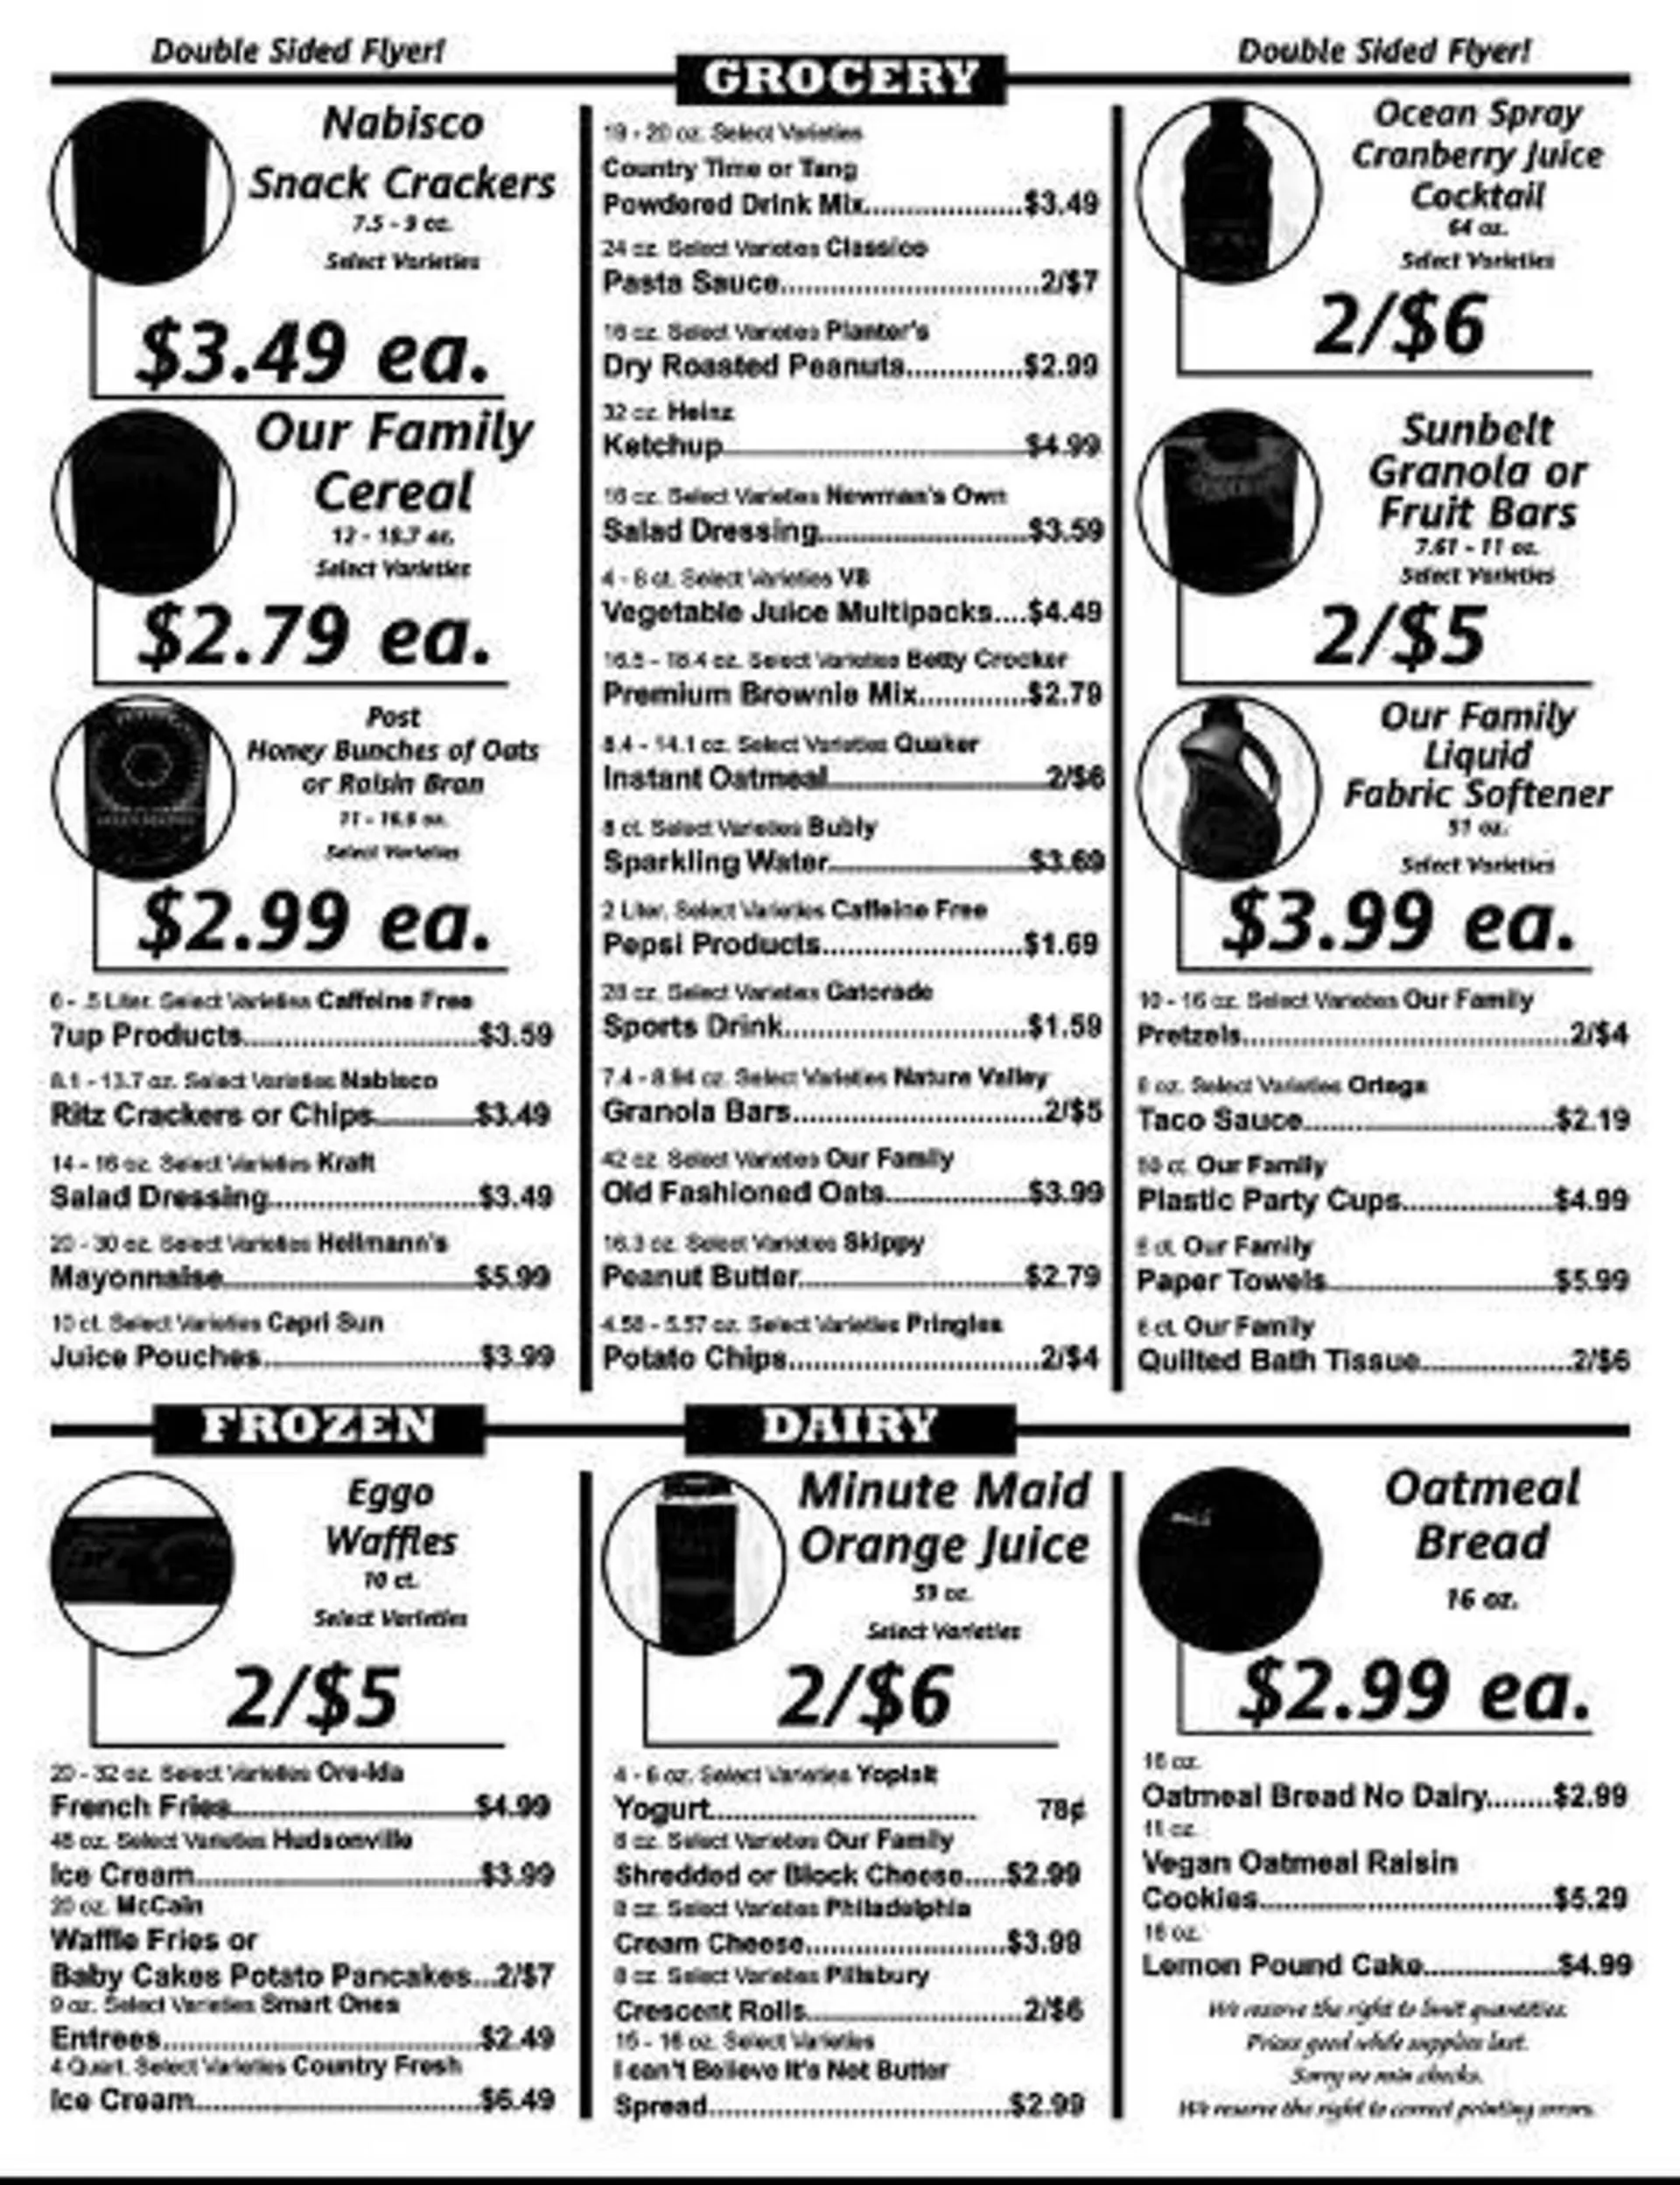 Apple Valley Natural Foods Weekly Ad - 2